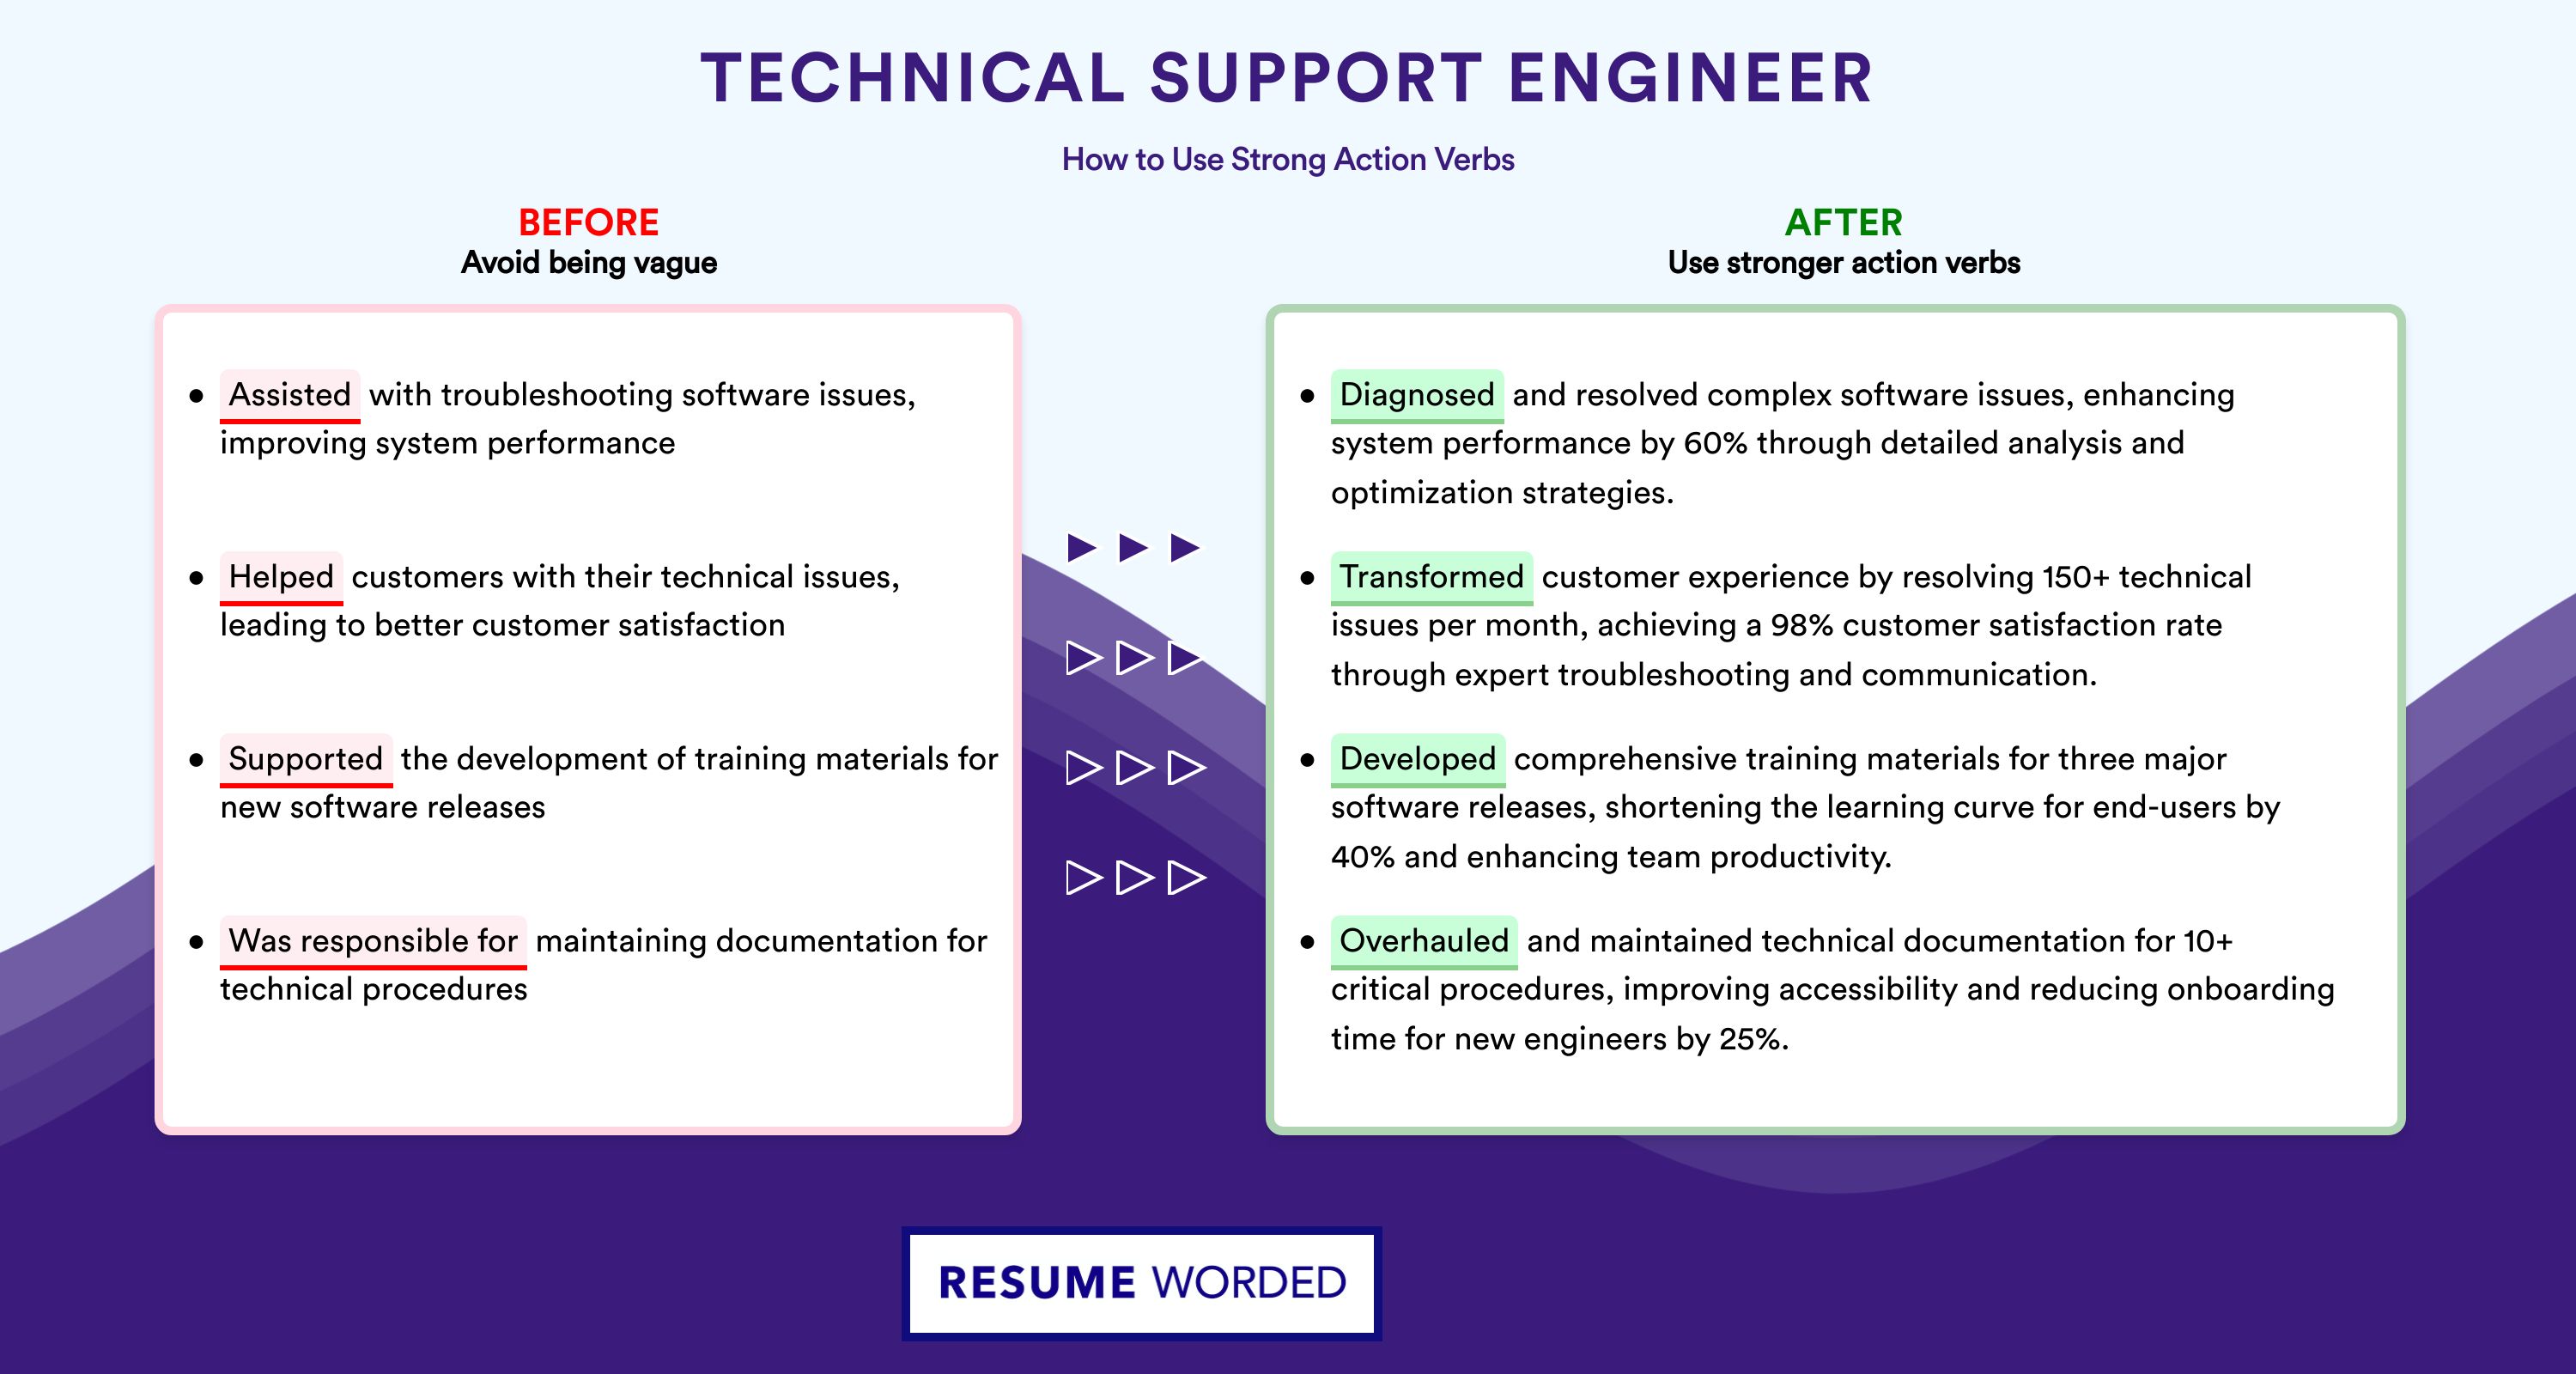 Action Verbs for Technical Support Engineer